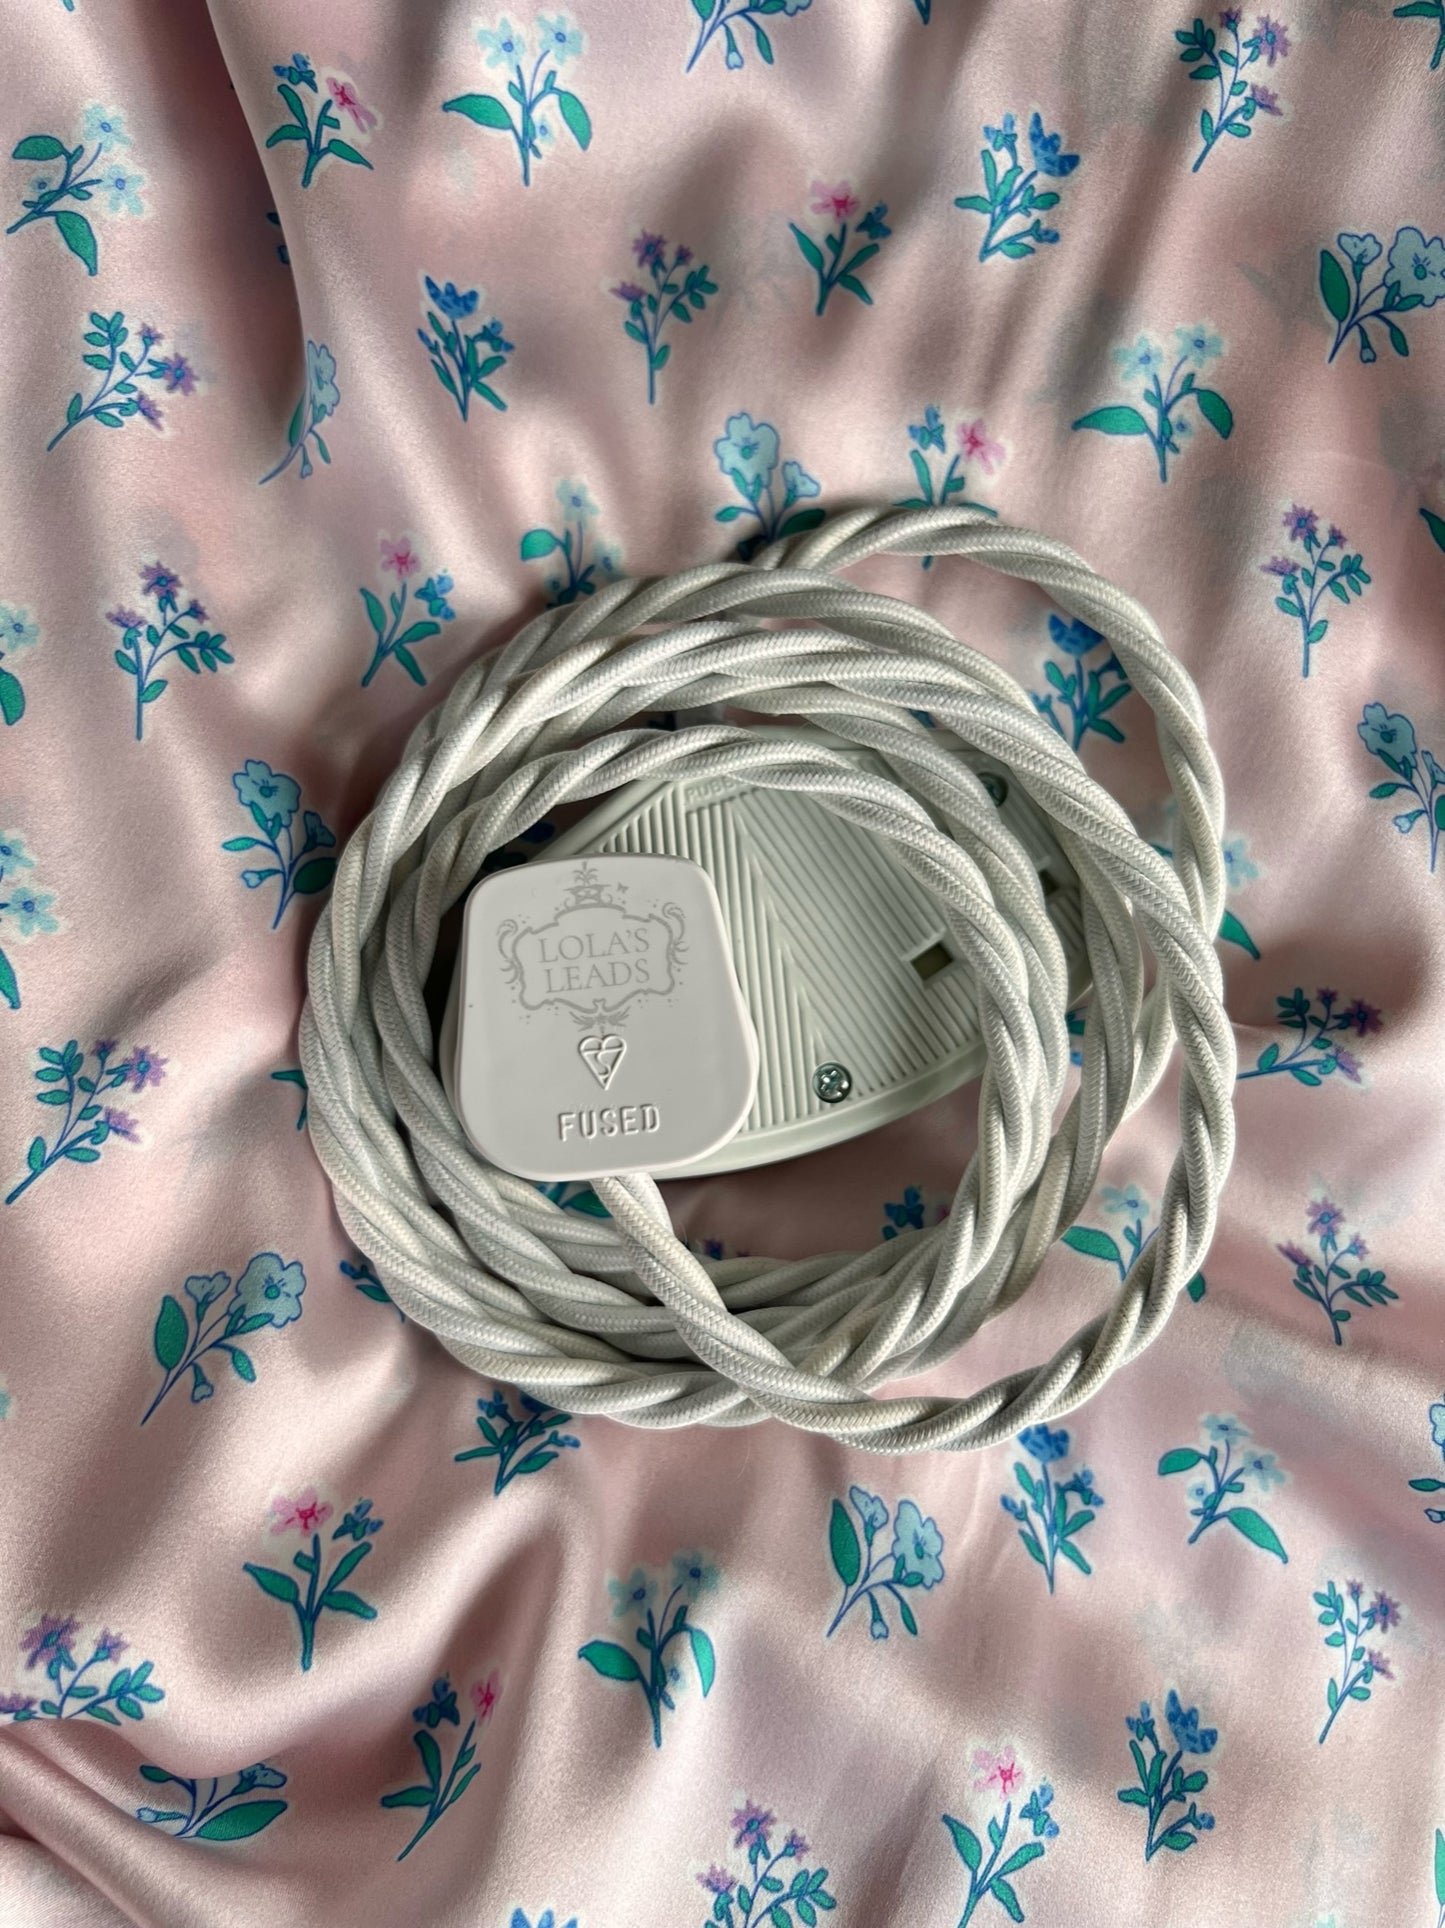 Milk - Lola's Leads Fabric Extension Cable